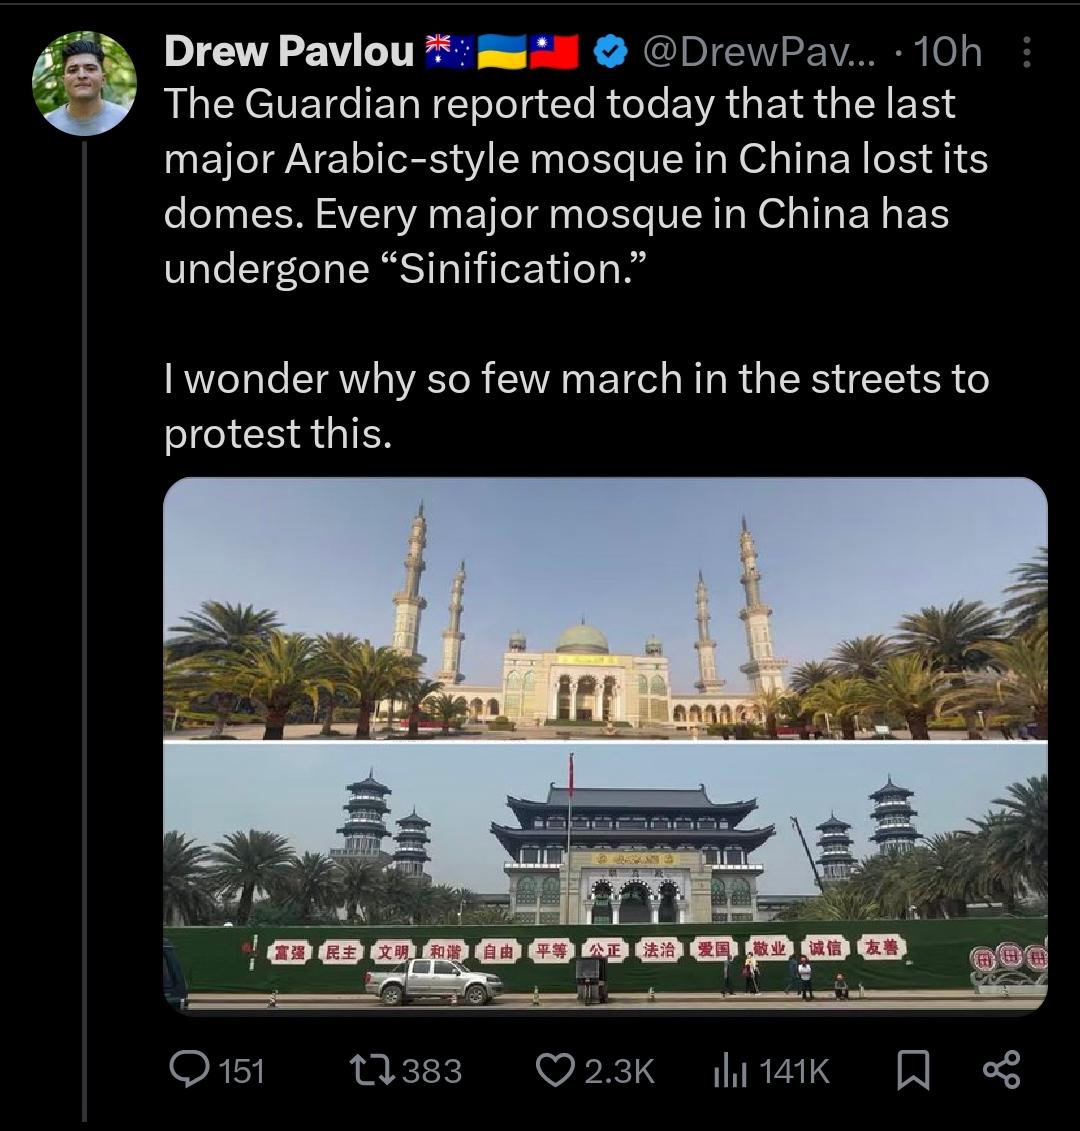 Even if Drew wants you to believe he's genuinely upset about this mosque redesign, he's using it to gaslight (yet again) people protesting an ongoing slaughter of Palestinian children whose deaths are apparently about as important as Mosque architecture. x.com/DanielDumbrill…